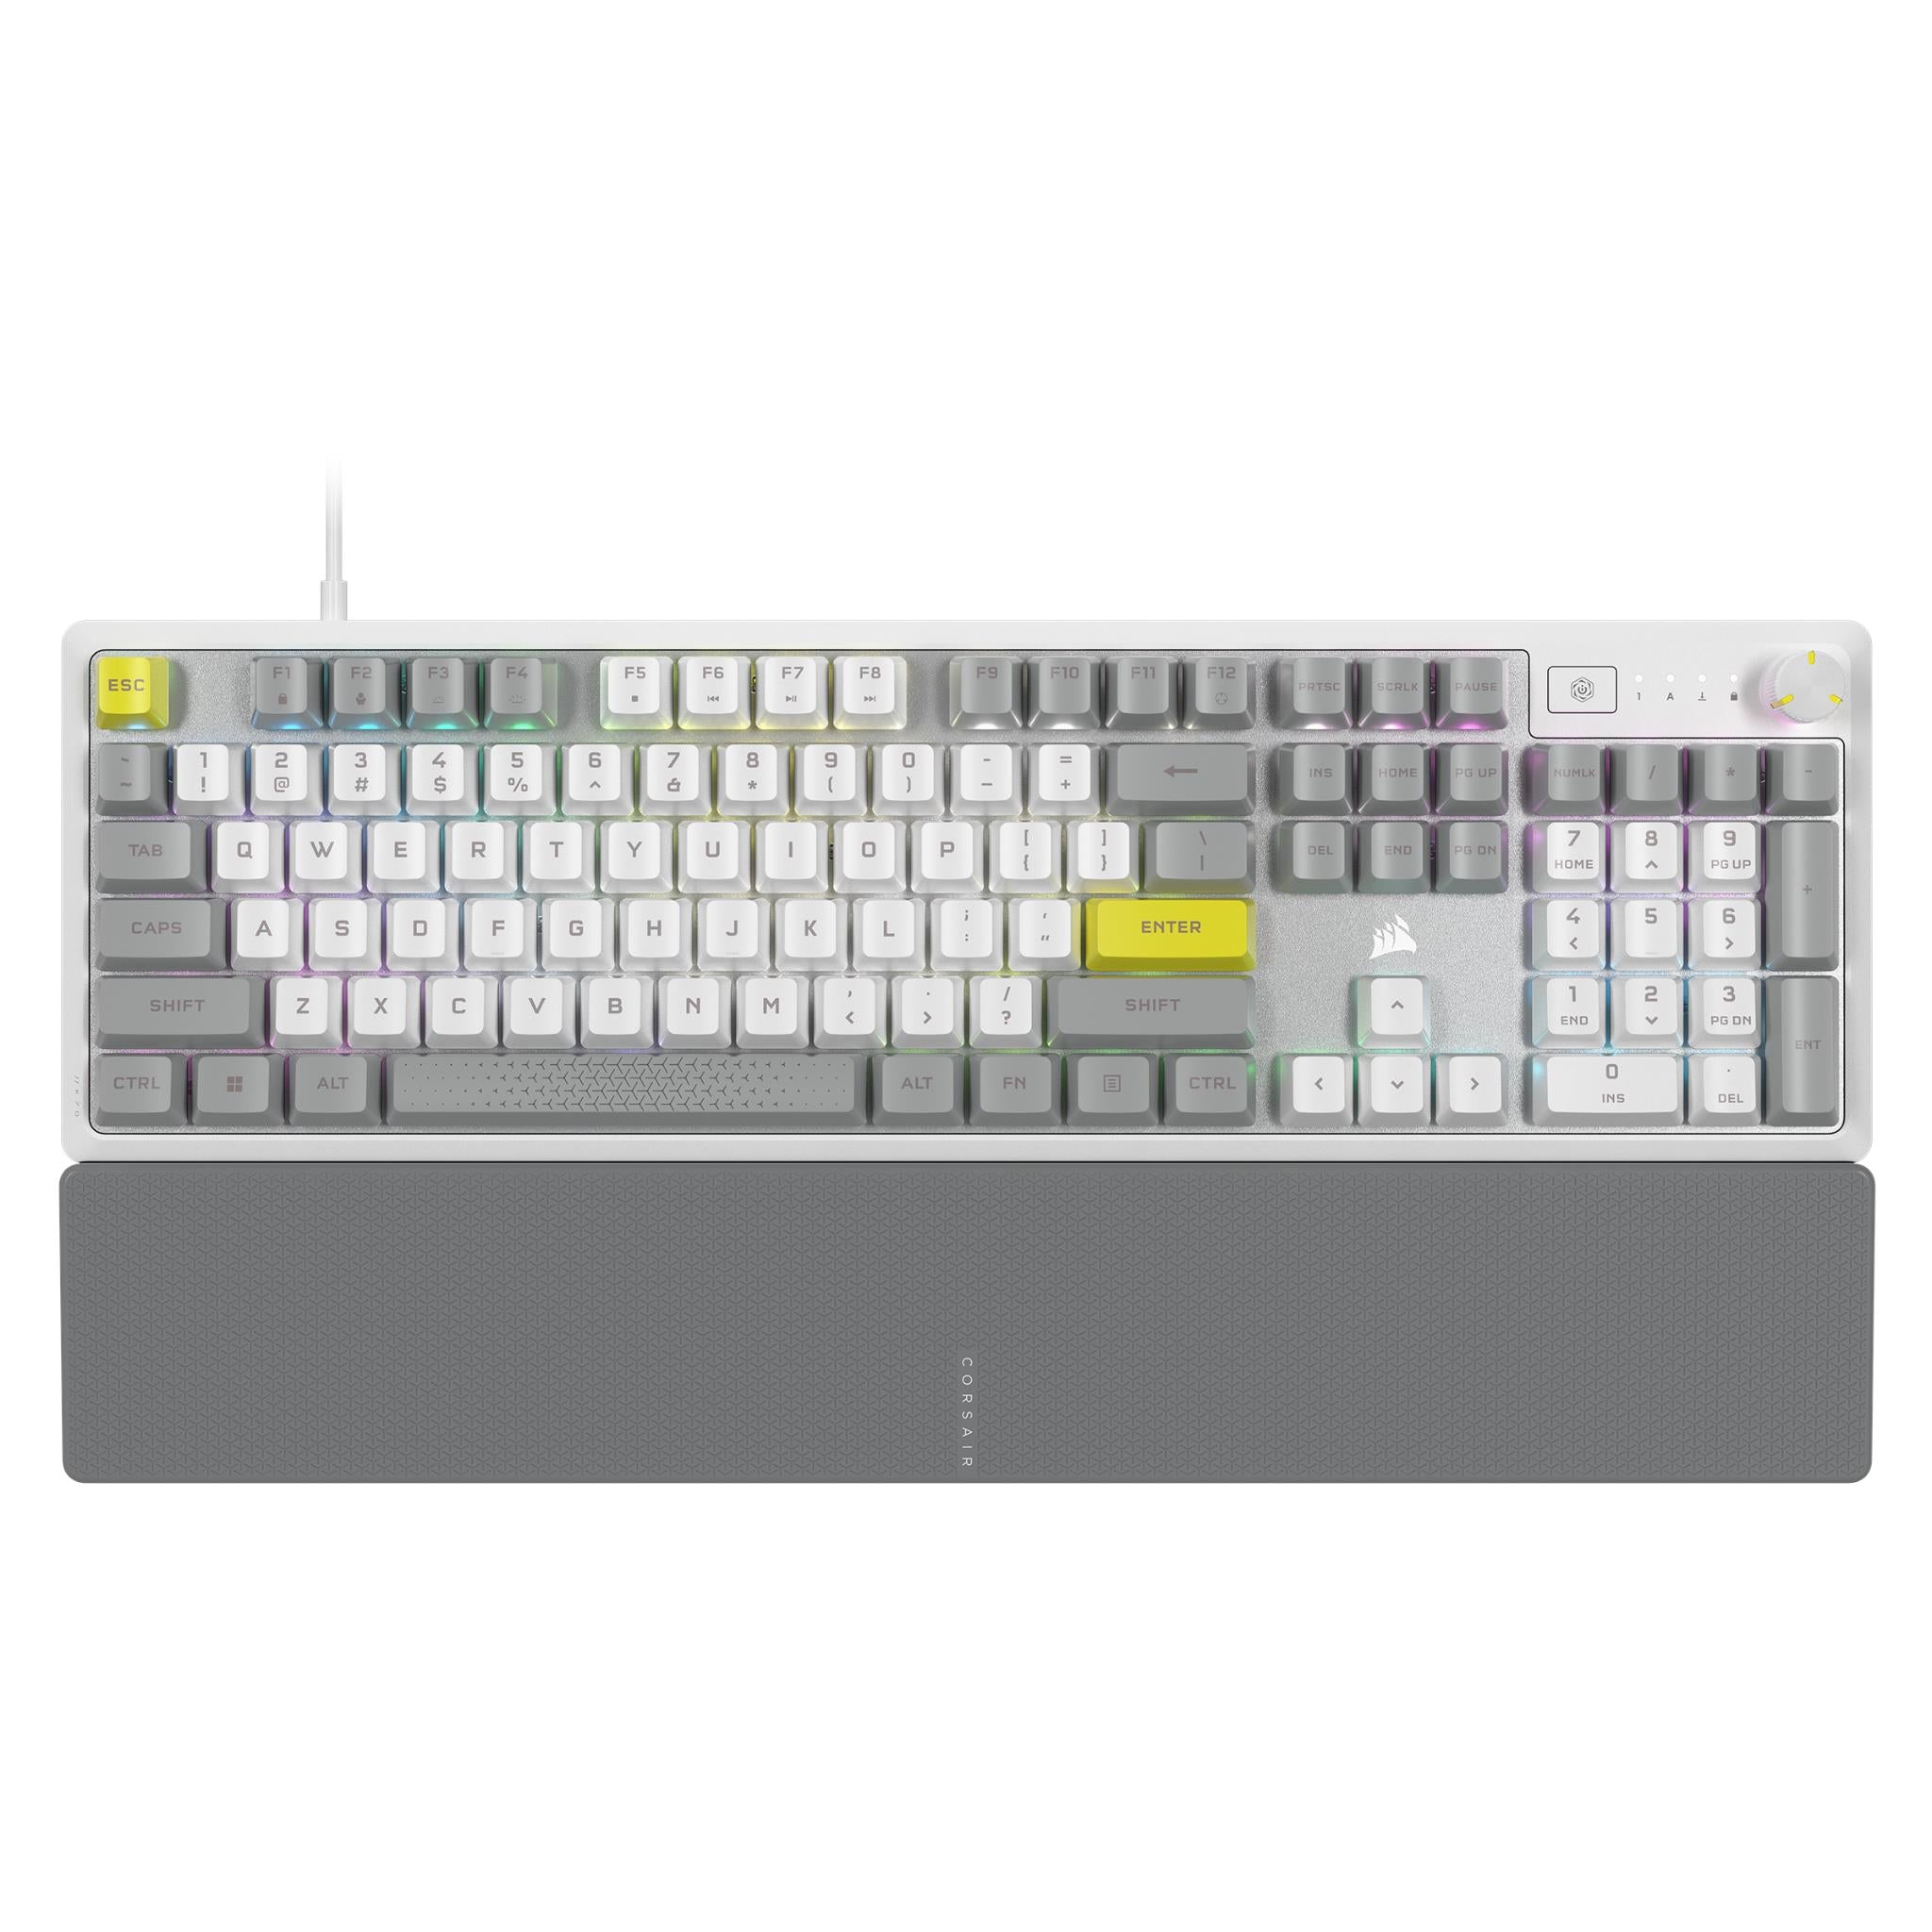 corsair k70 core se rgb mechanical gaming keyboard with palm rest (white)